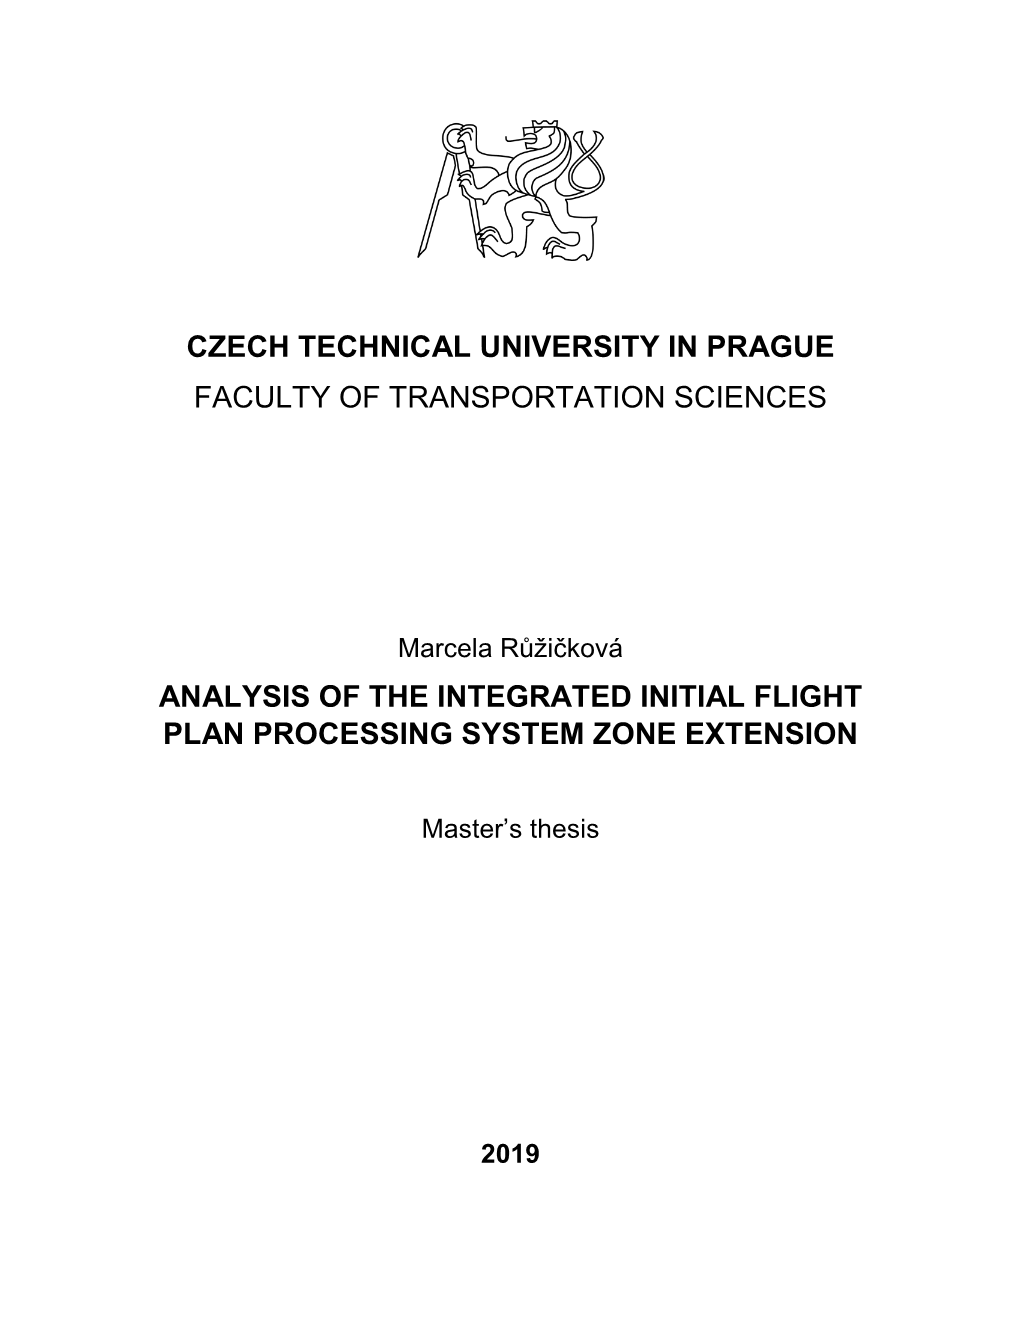 Analysis of the Integrated Initial Flight Plan Processing System Zone Extension